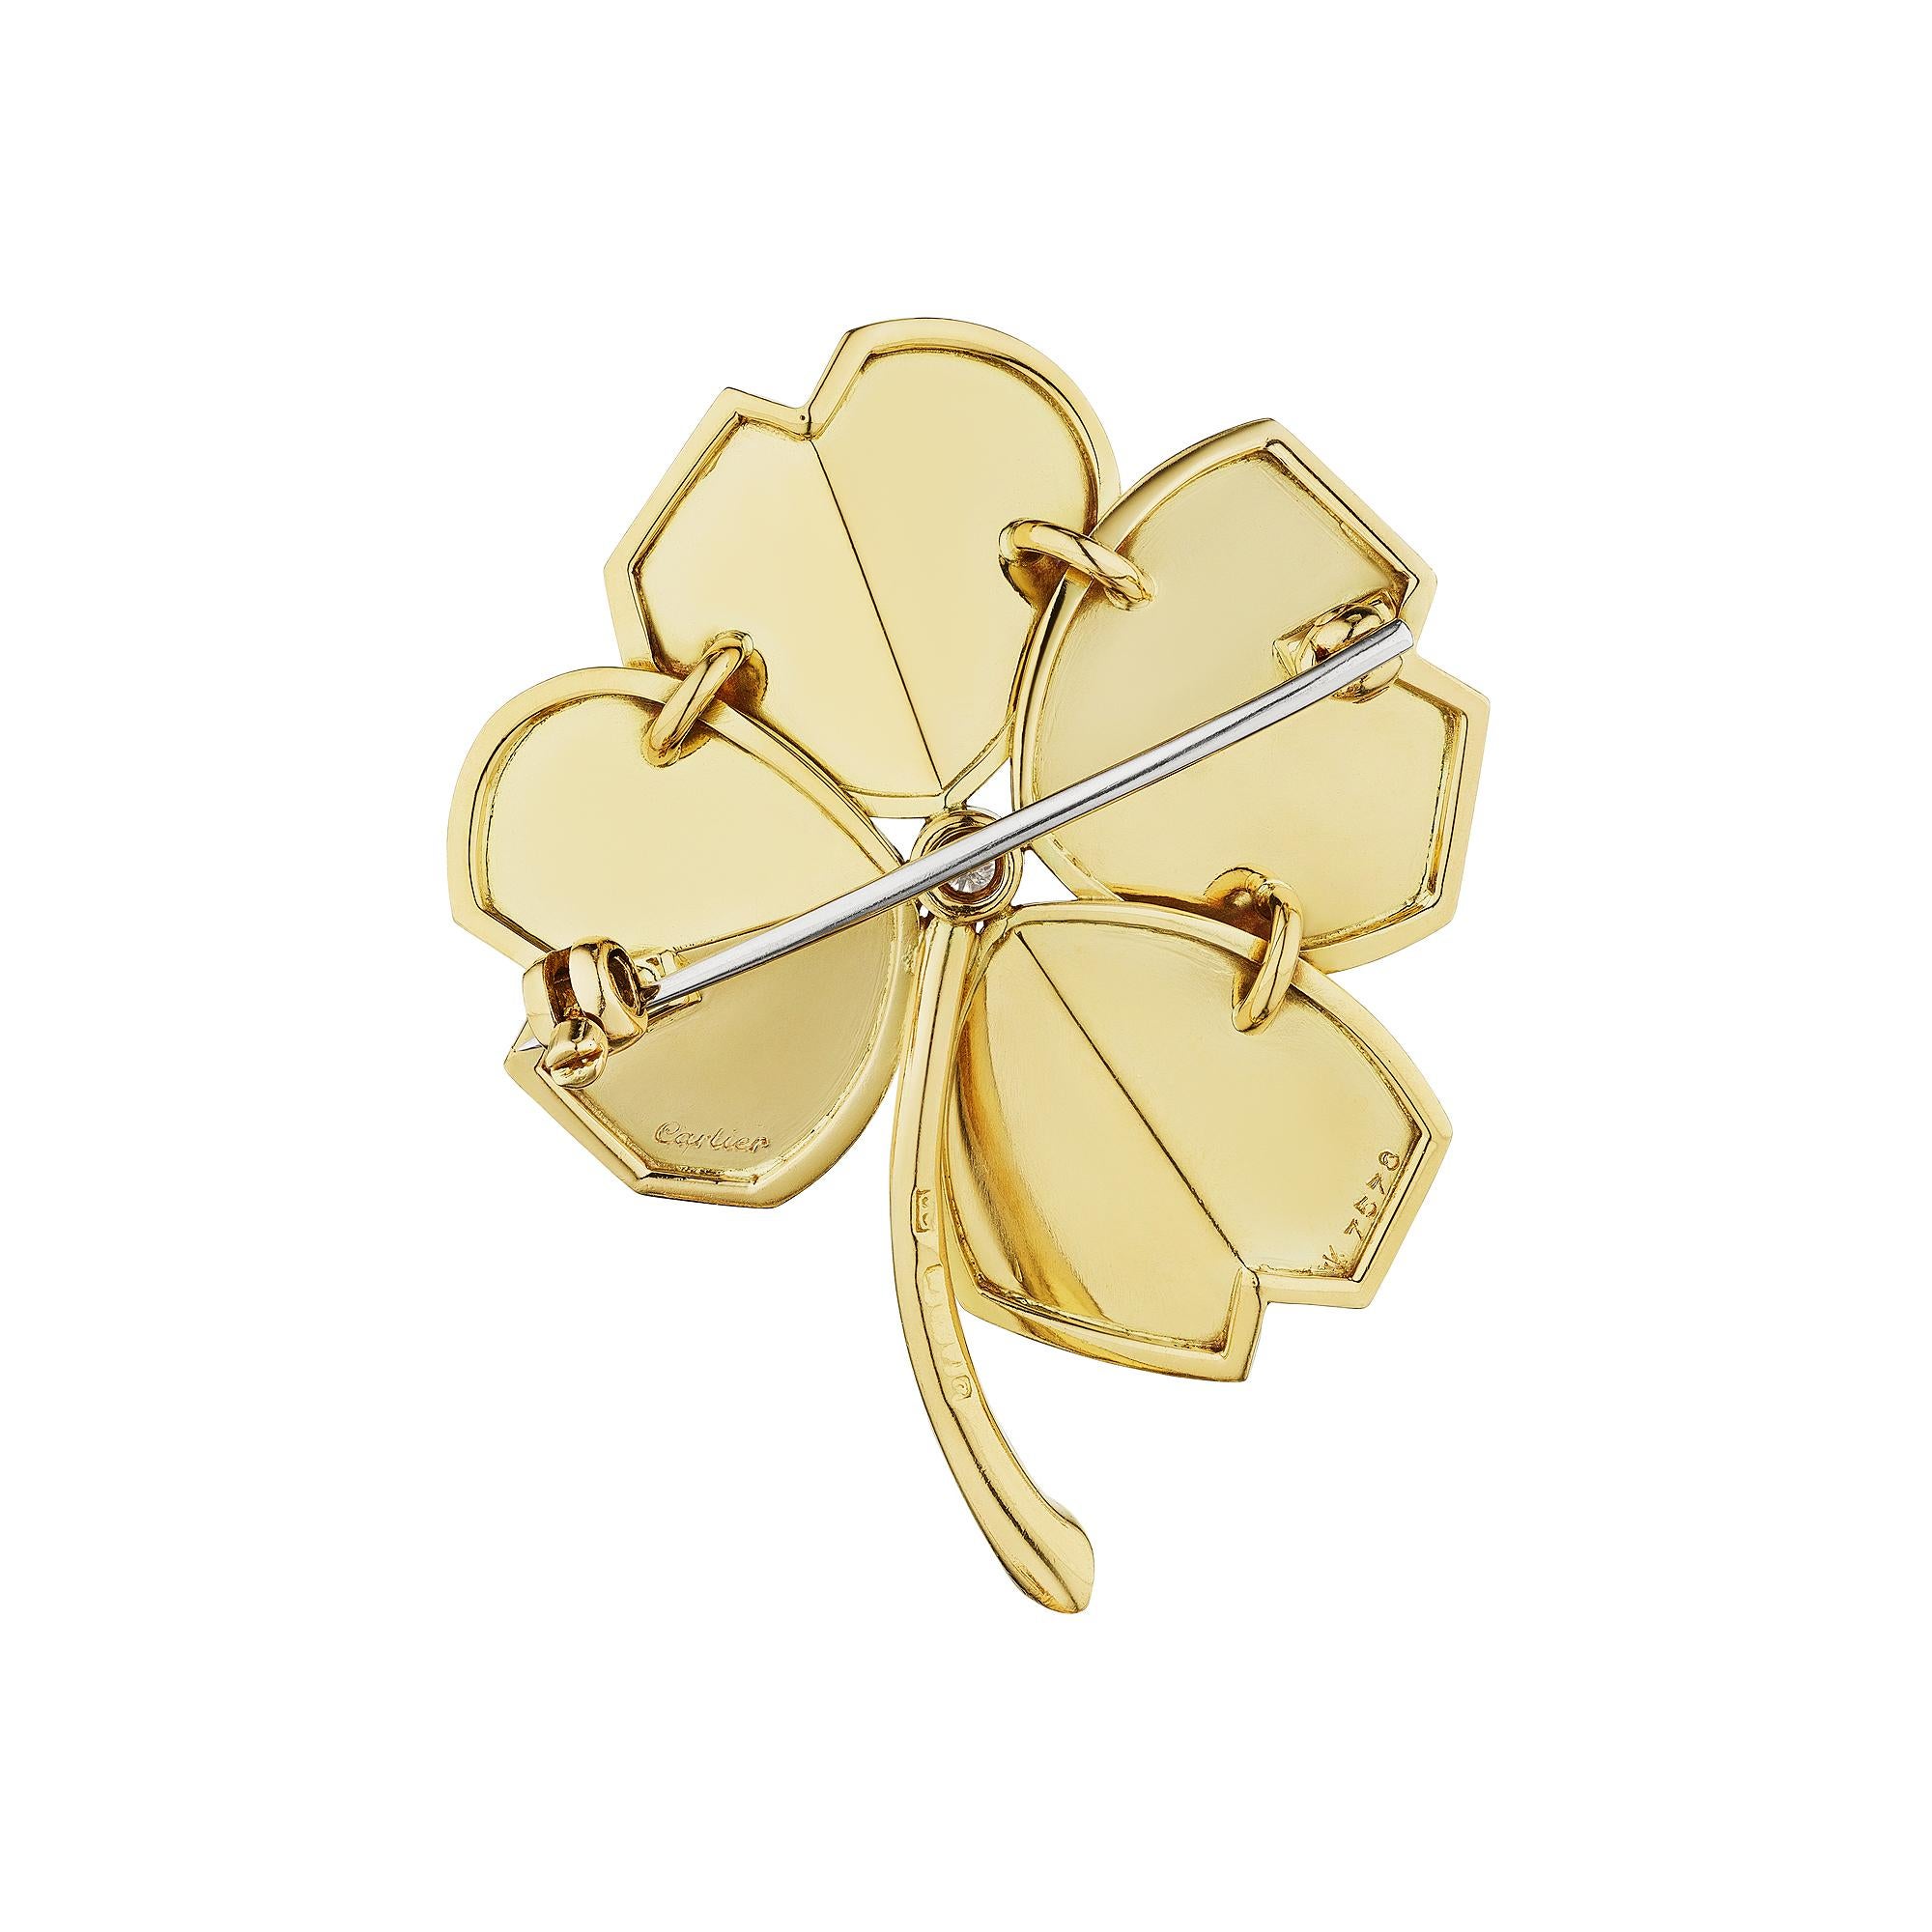 Rare to find but lucky to have, this mid-century Cartier diamond gold brooch is charmed.  With a round center diamond and linear engraved two dimensional leaves, this four leaf clover will keep you golden.  Circa 1950-60.  Signed Cartier.  Center